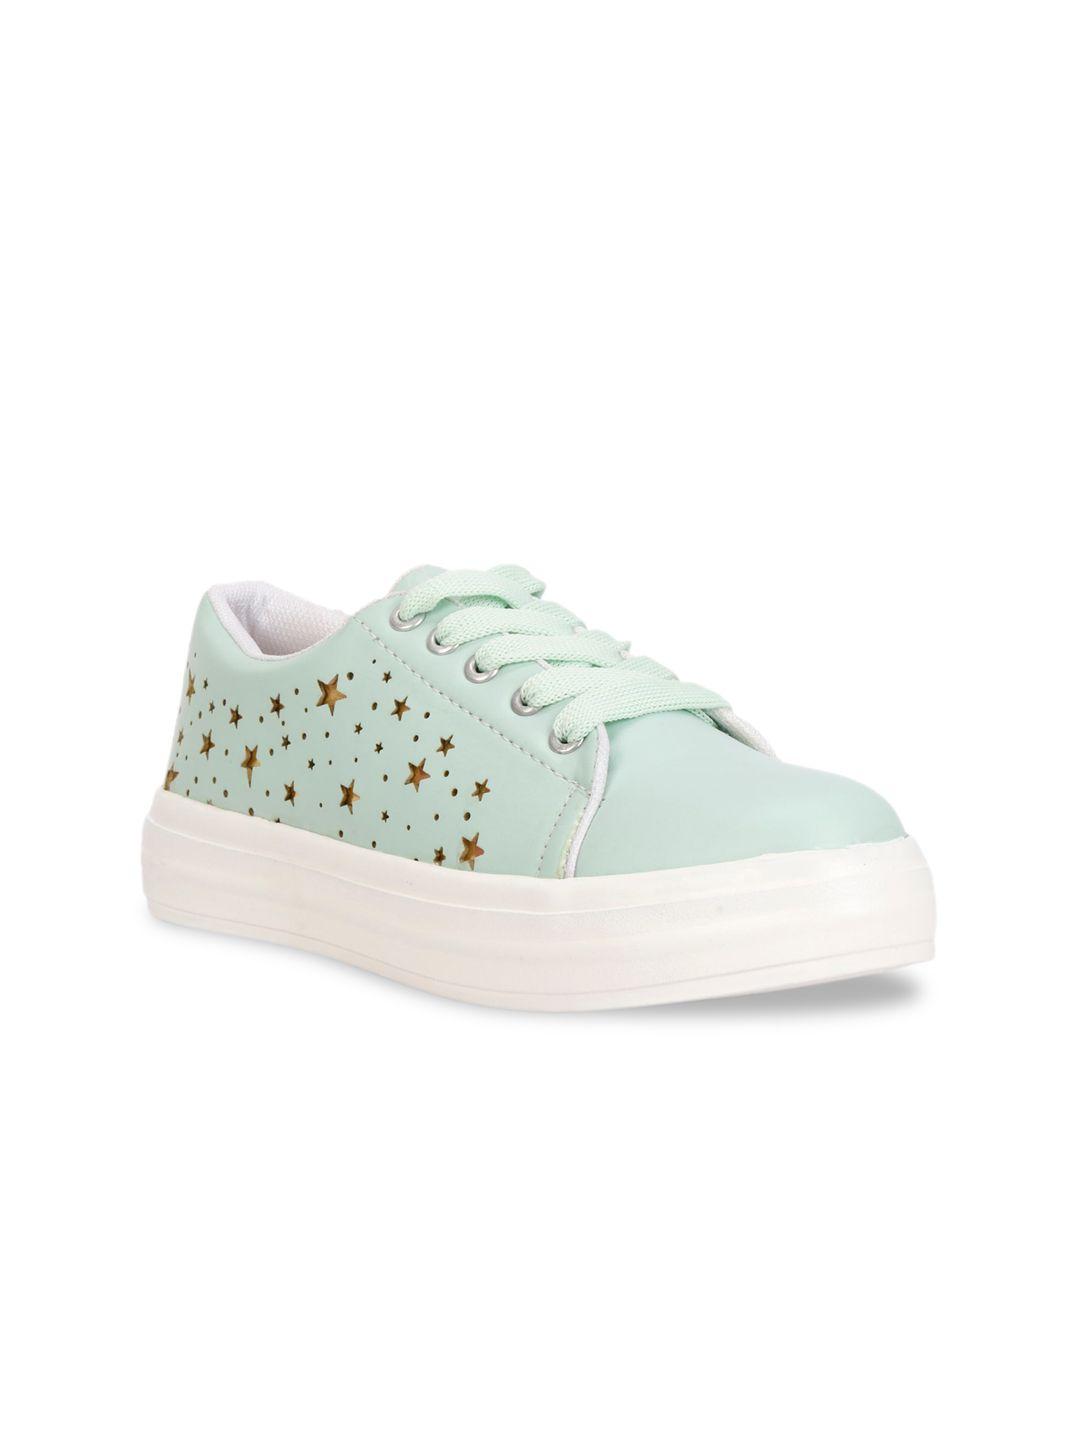 denill women turquoise blue printed sneakers